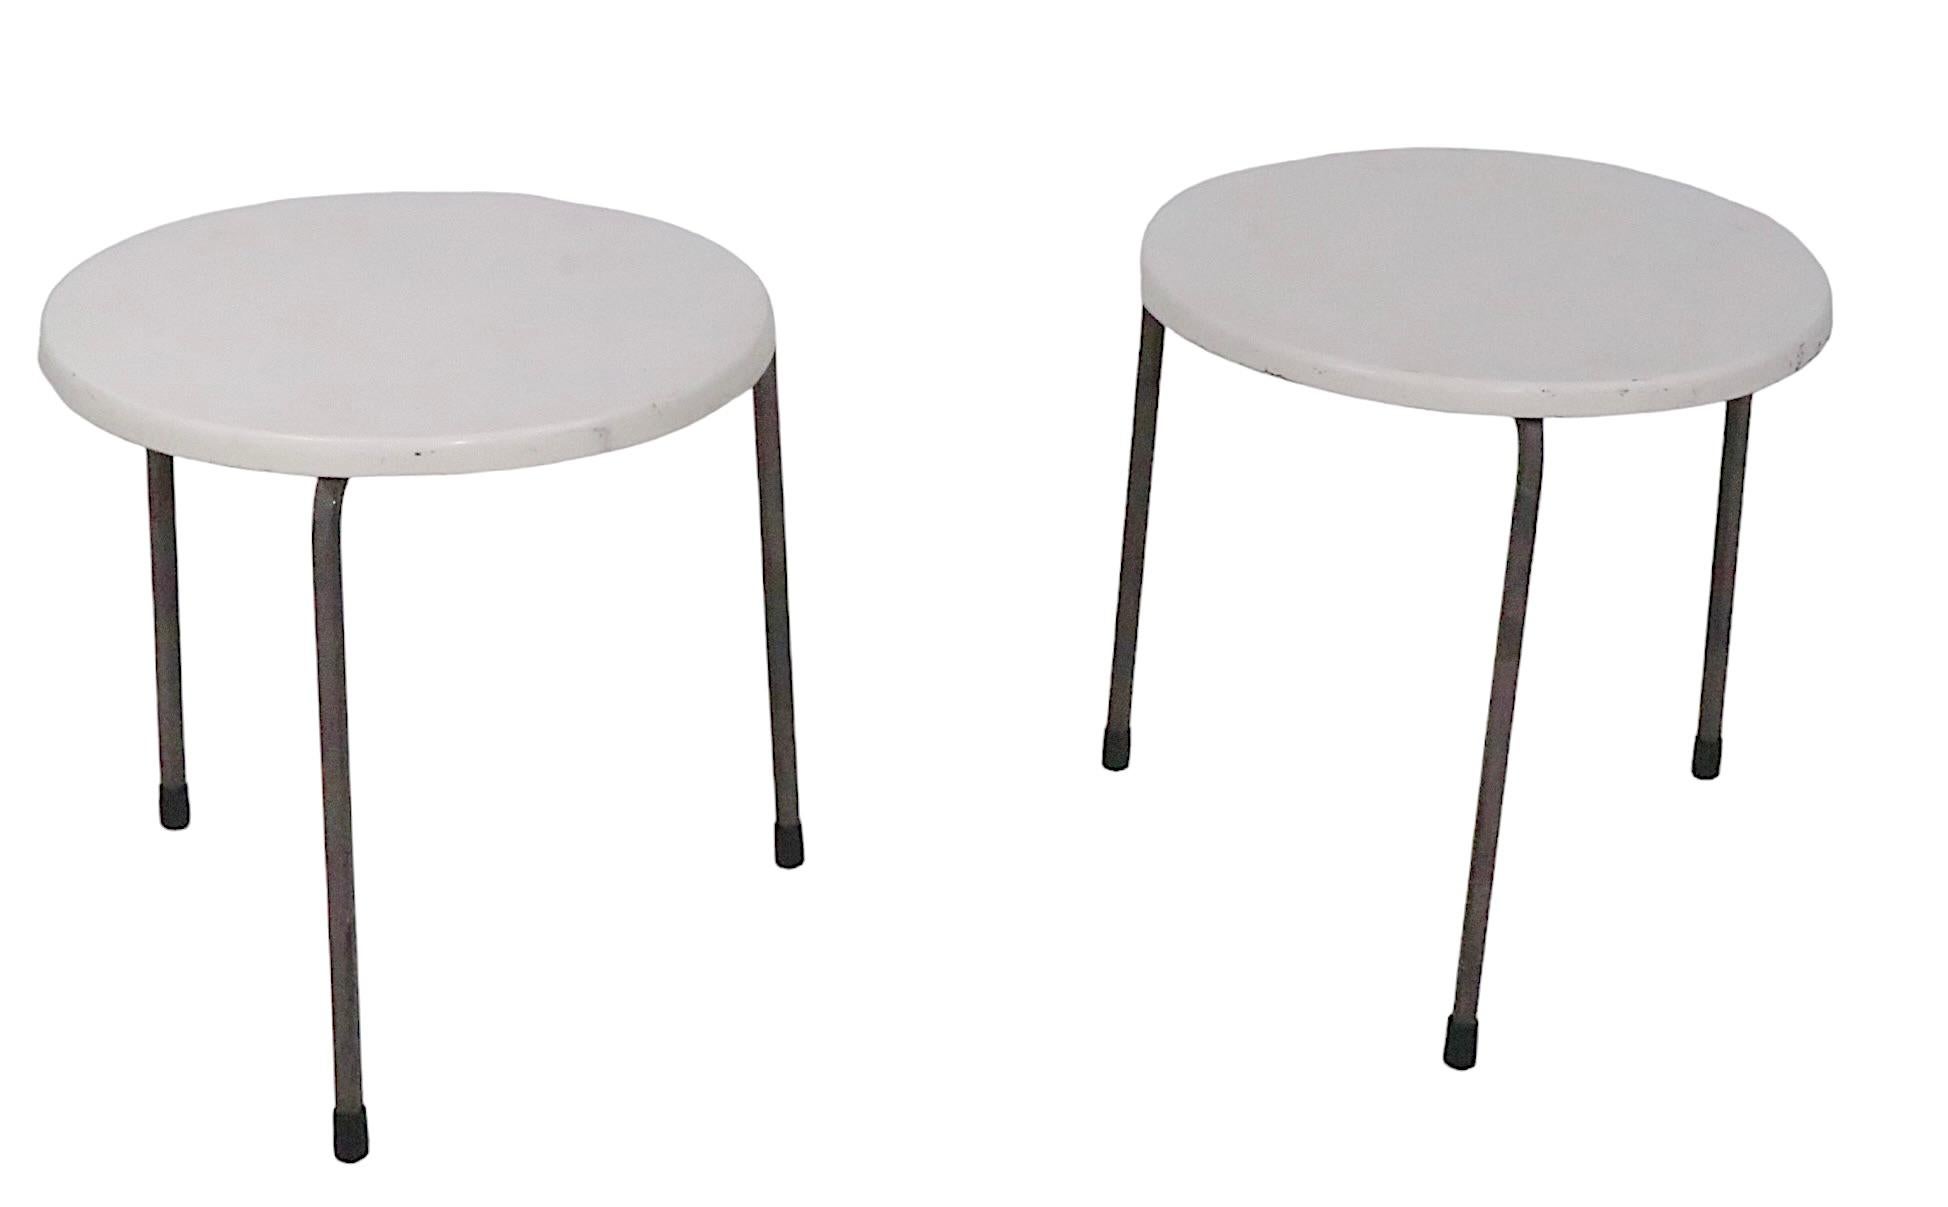 Pr.  Mid Century Patio Poolside Tables by Fibreform Made in Florida c.1950/1970s For Sale 11